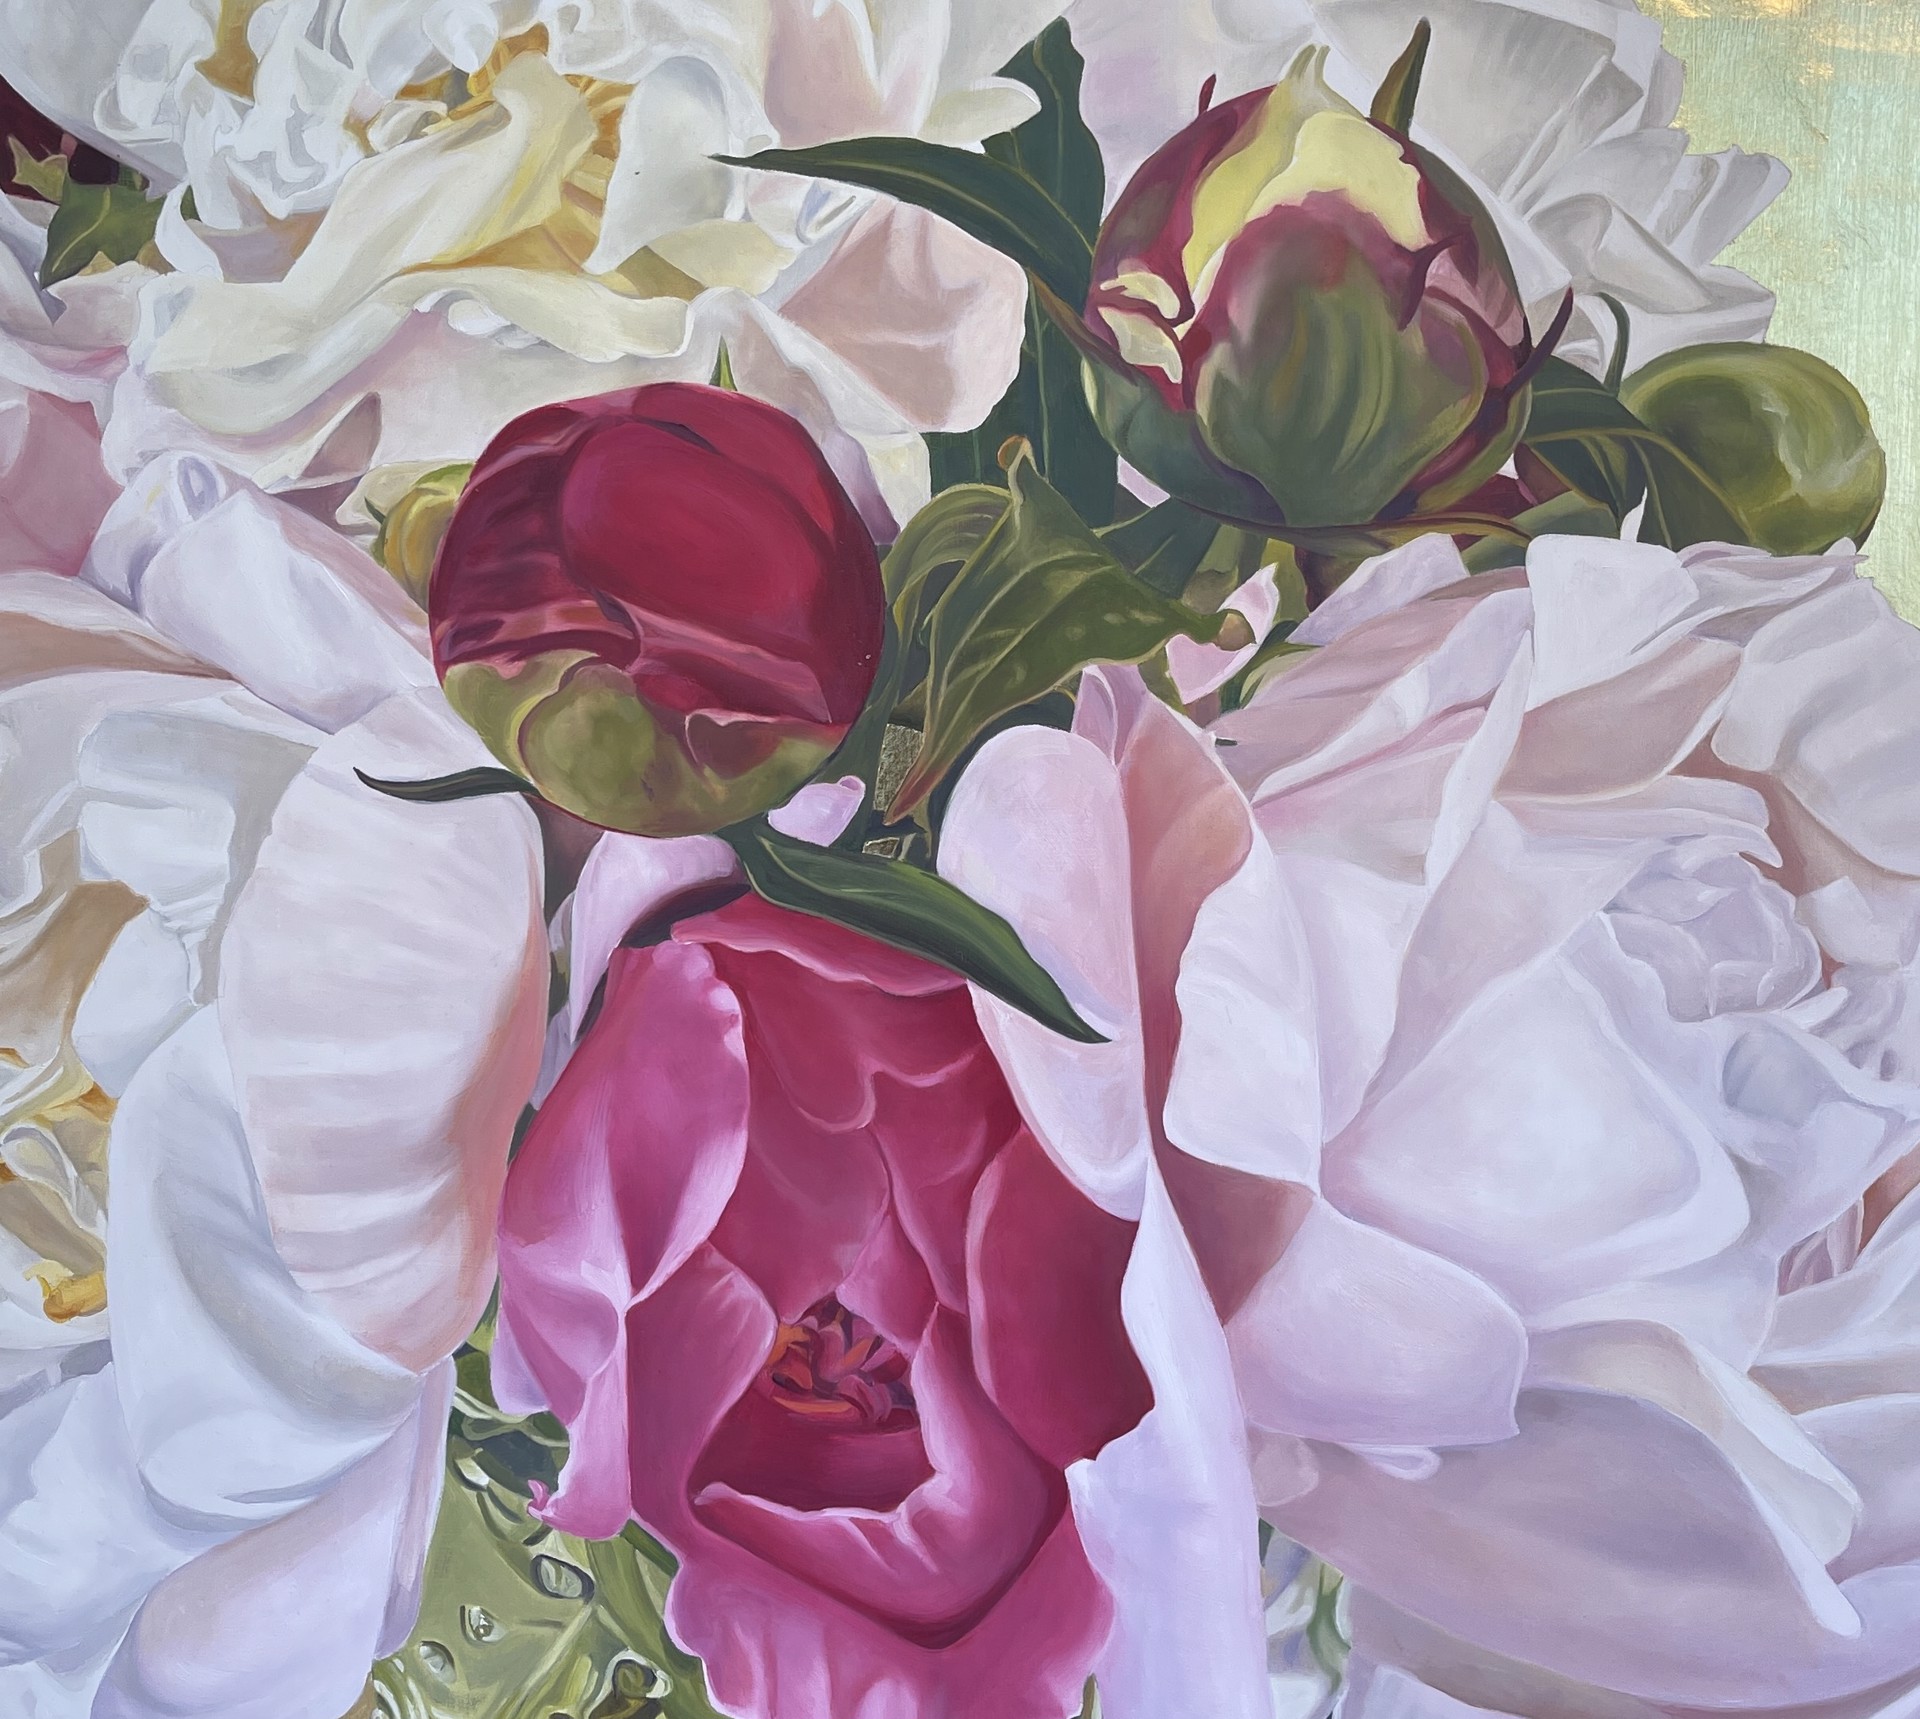 June (peonies white and pink buds) by Stephanie Danforth